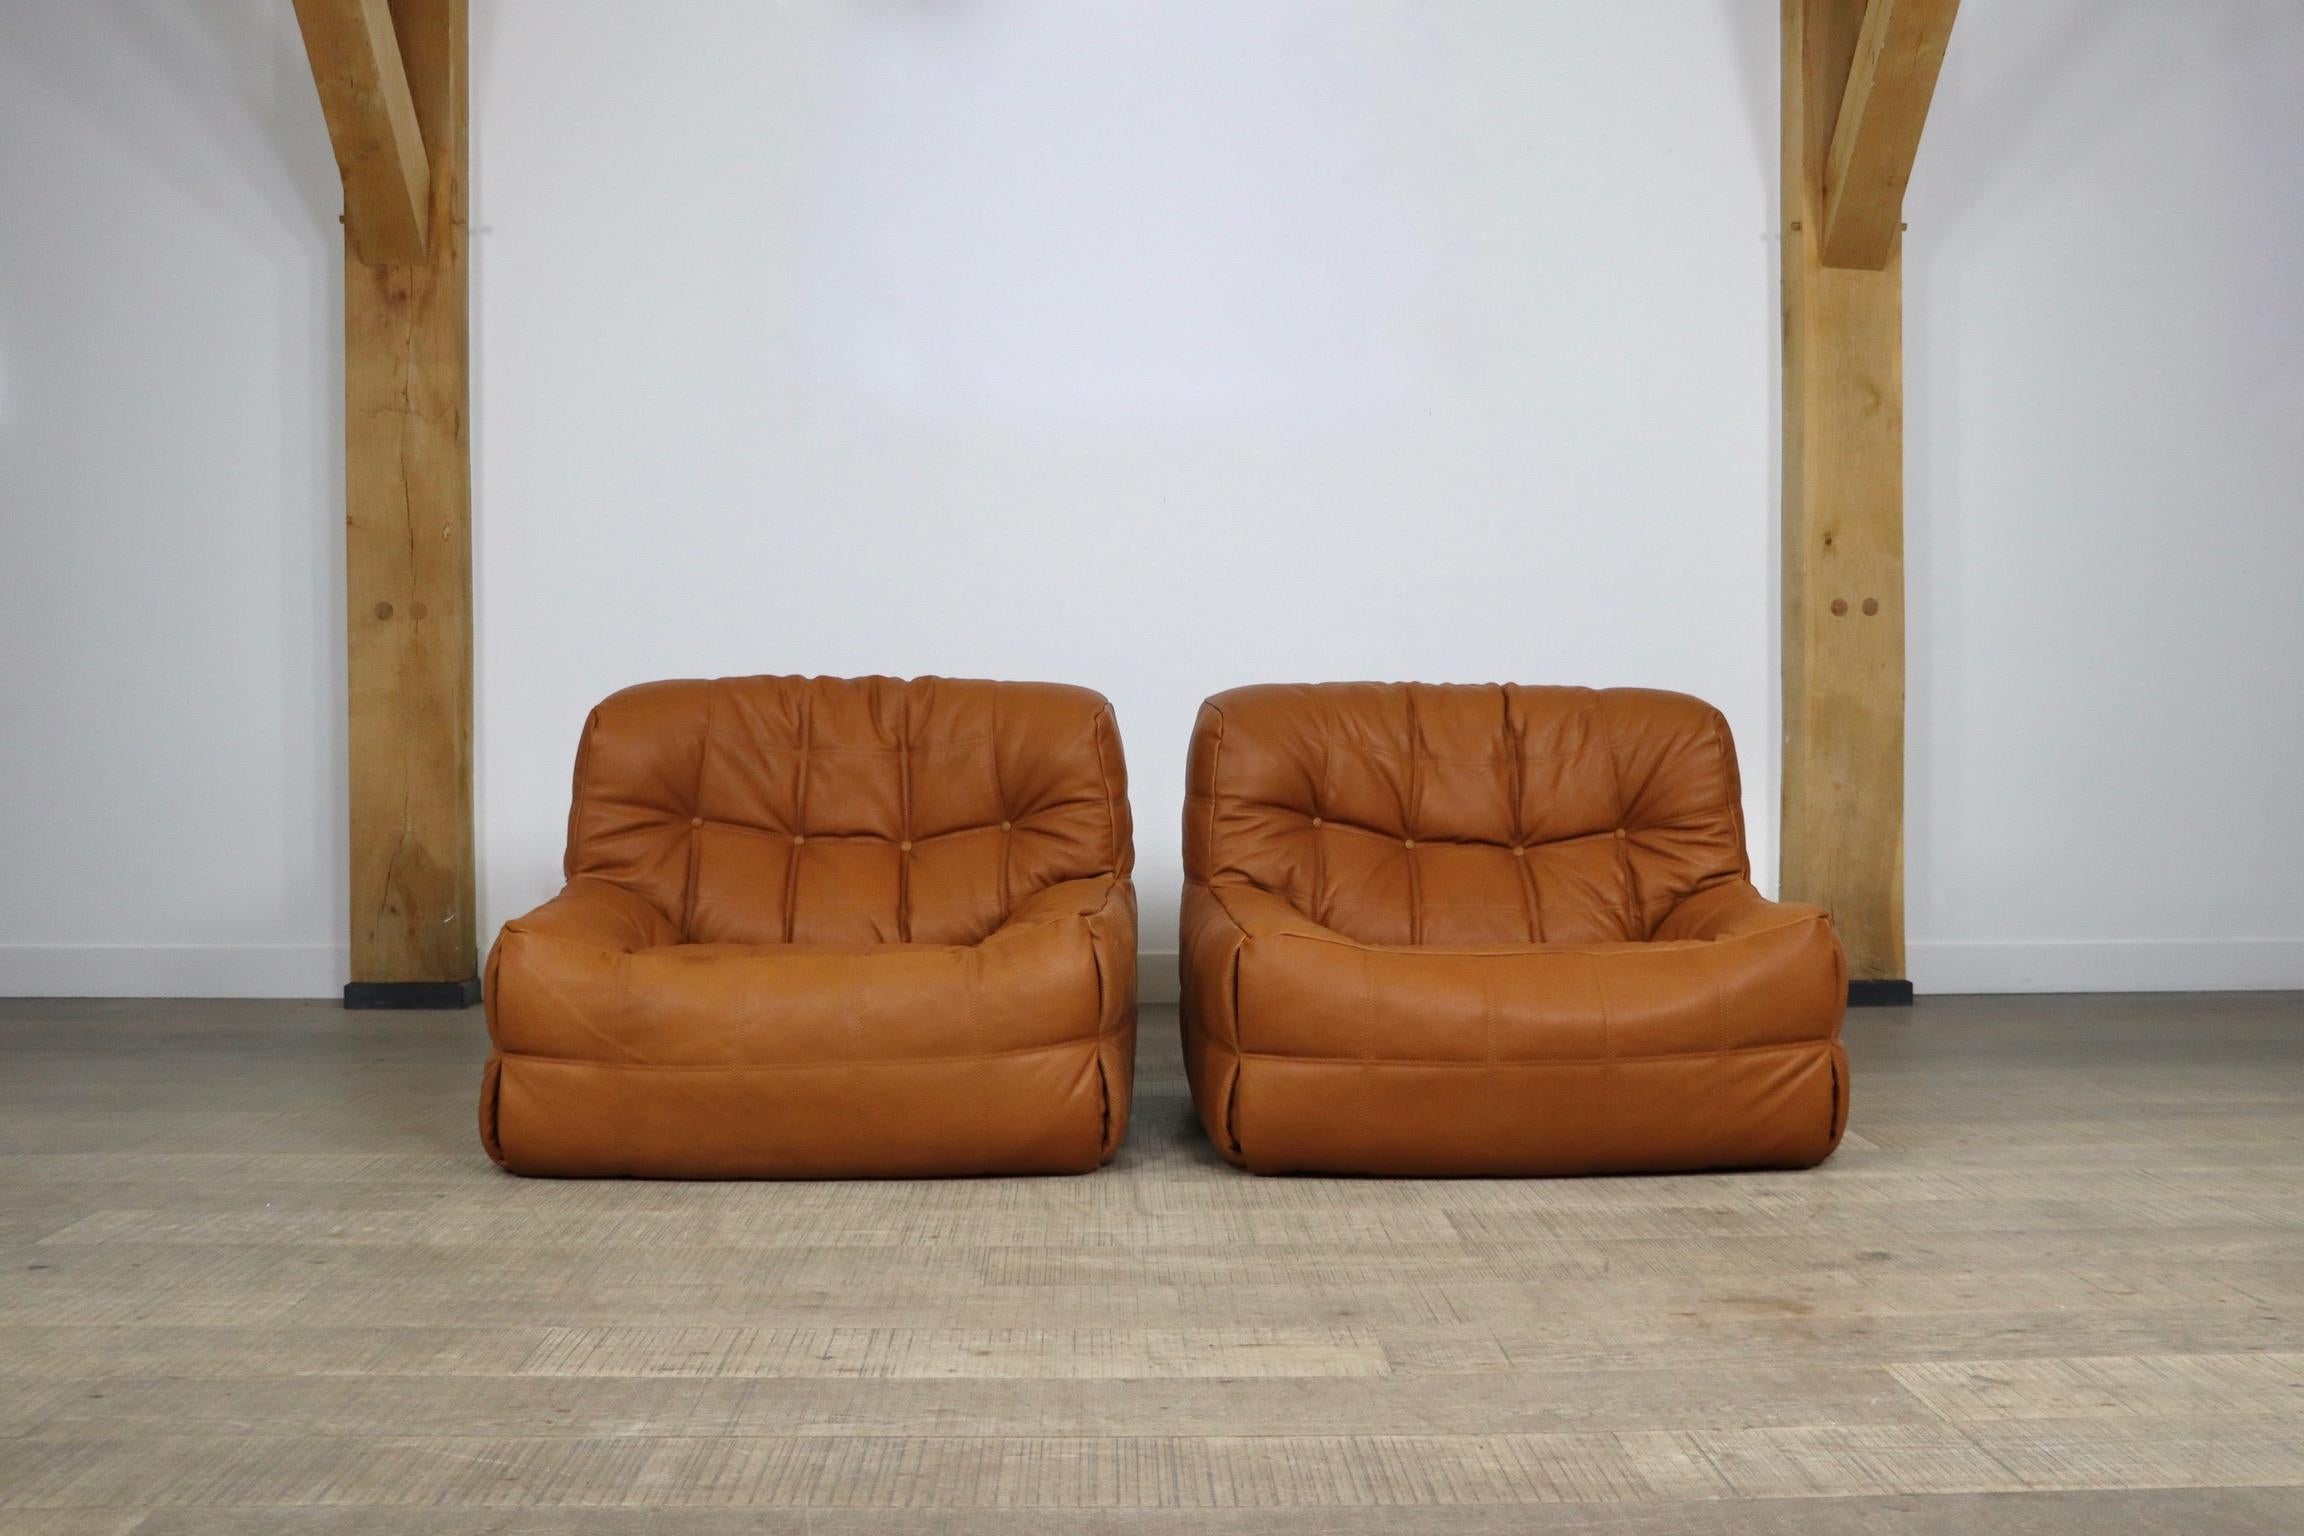 Stunning and extremely comfortable pair of Kashima lounge chairs in cognac leather by Michel Ducaroy for Ligne Roset, 1970s. These chairs have been professionally reupholstered in high quality Aniline leather which will obtain a nice patina over